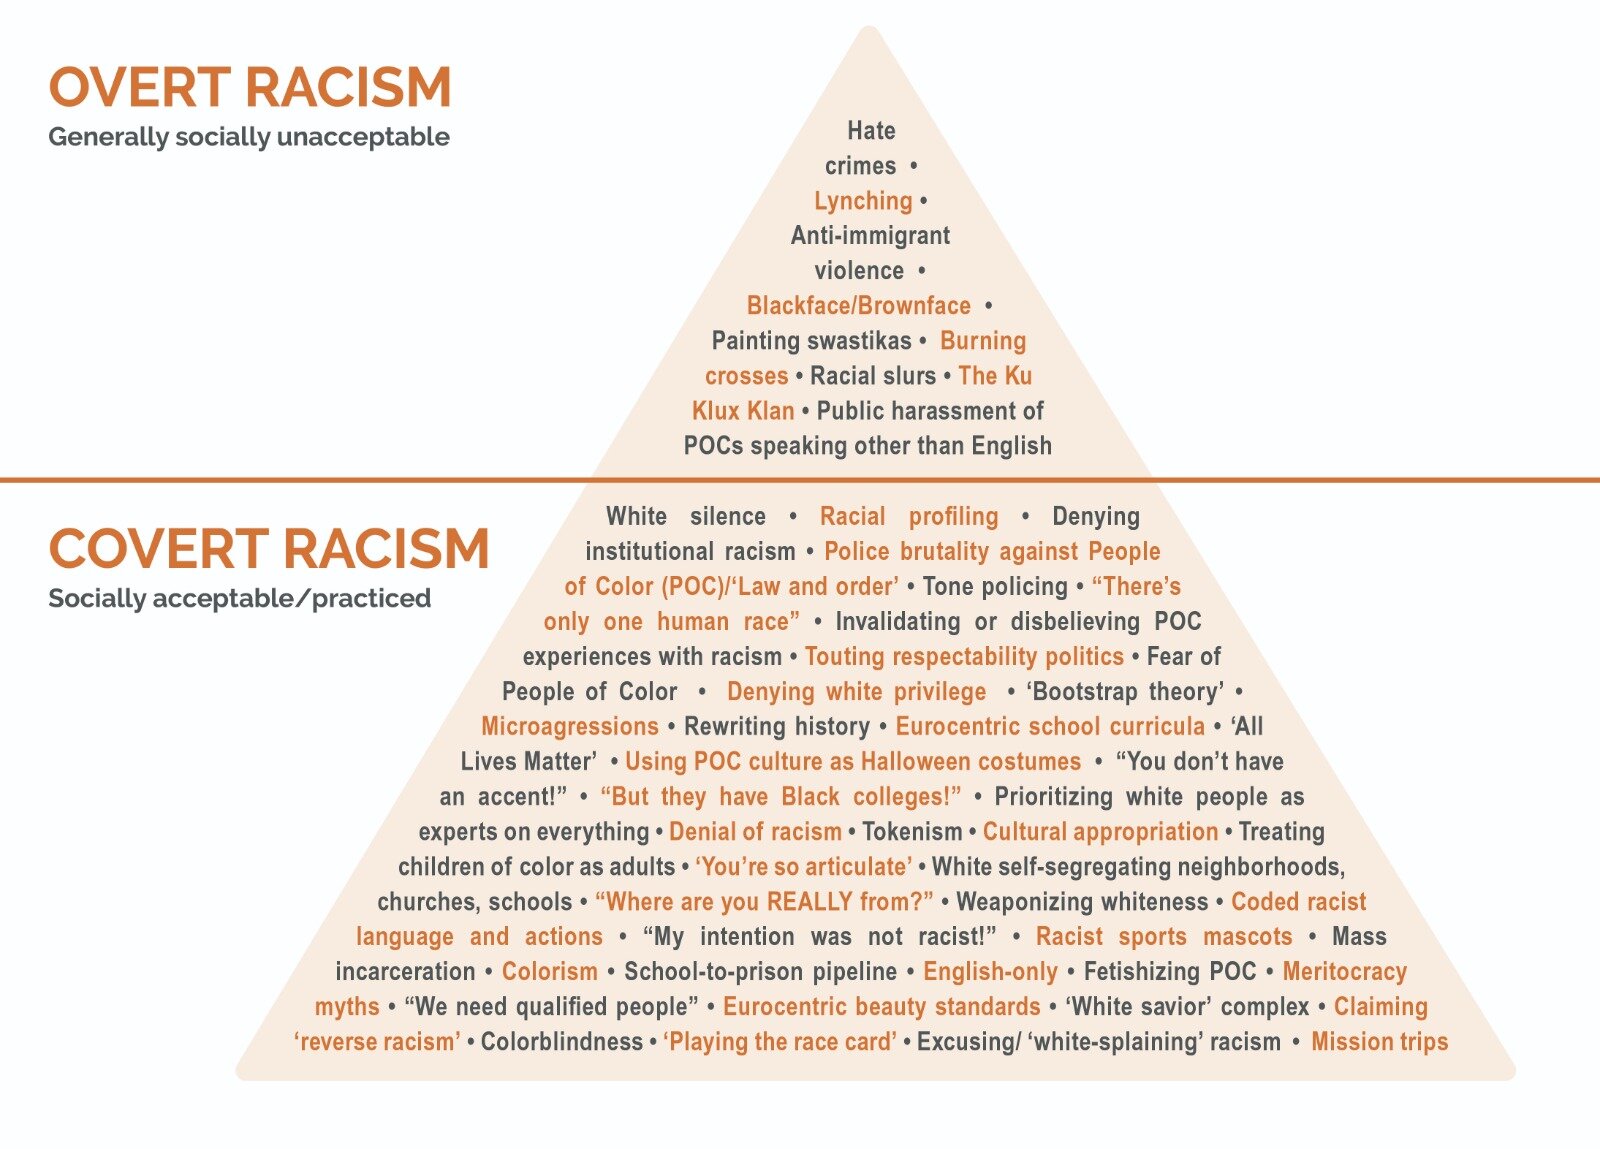 Pyramid of covert and overt racism, lists many supporting forms
at the bottom including colorblind racism and moving to acts of
violence at the top. Pyrmaid fully described in linked text below.